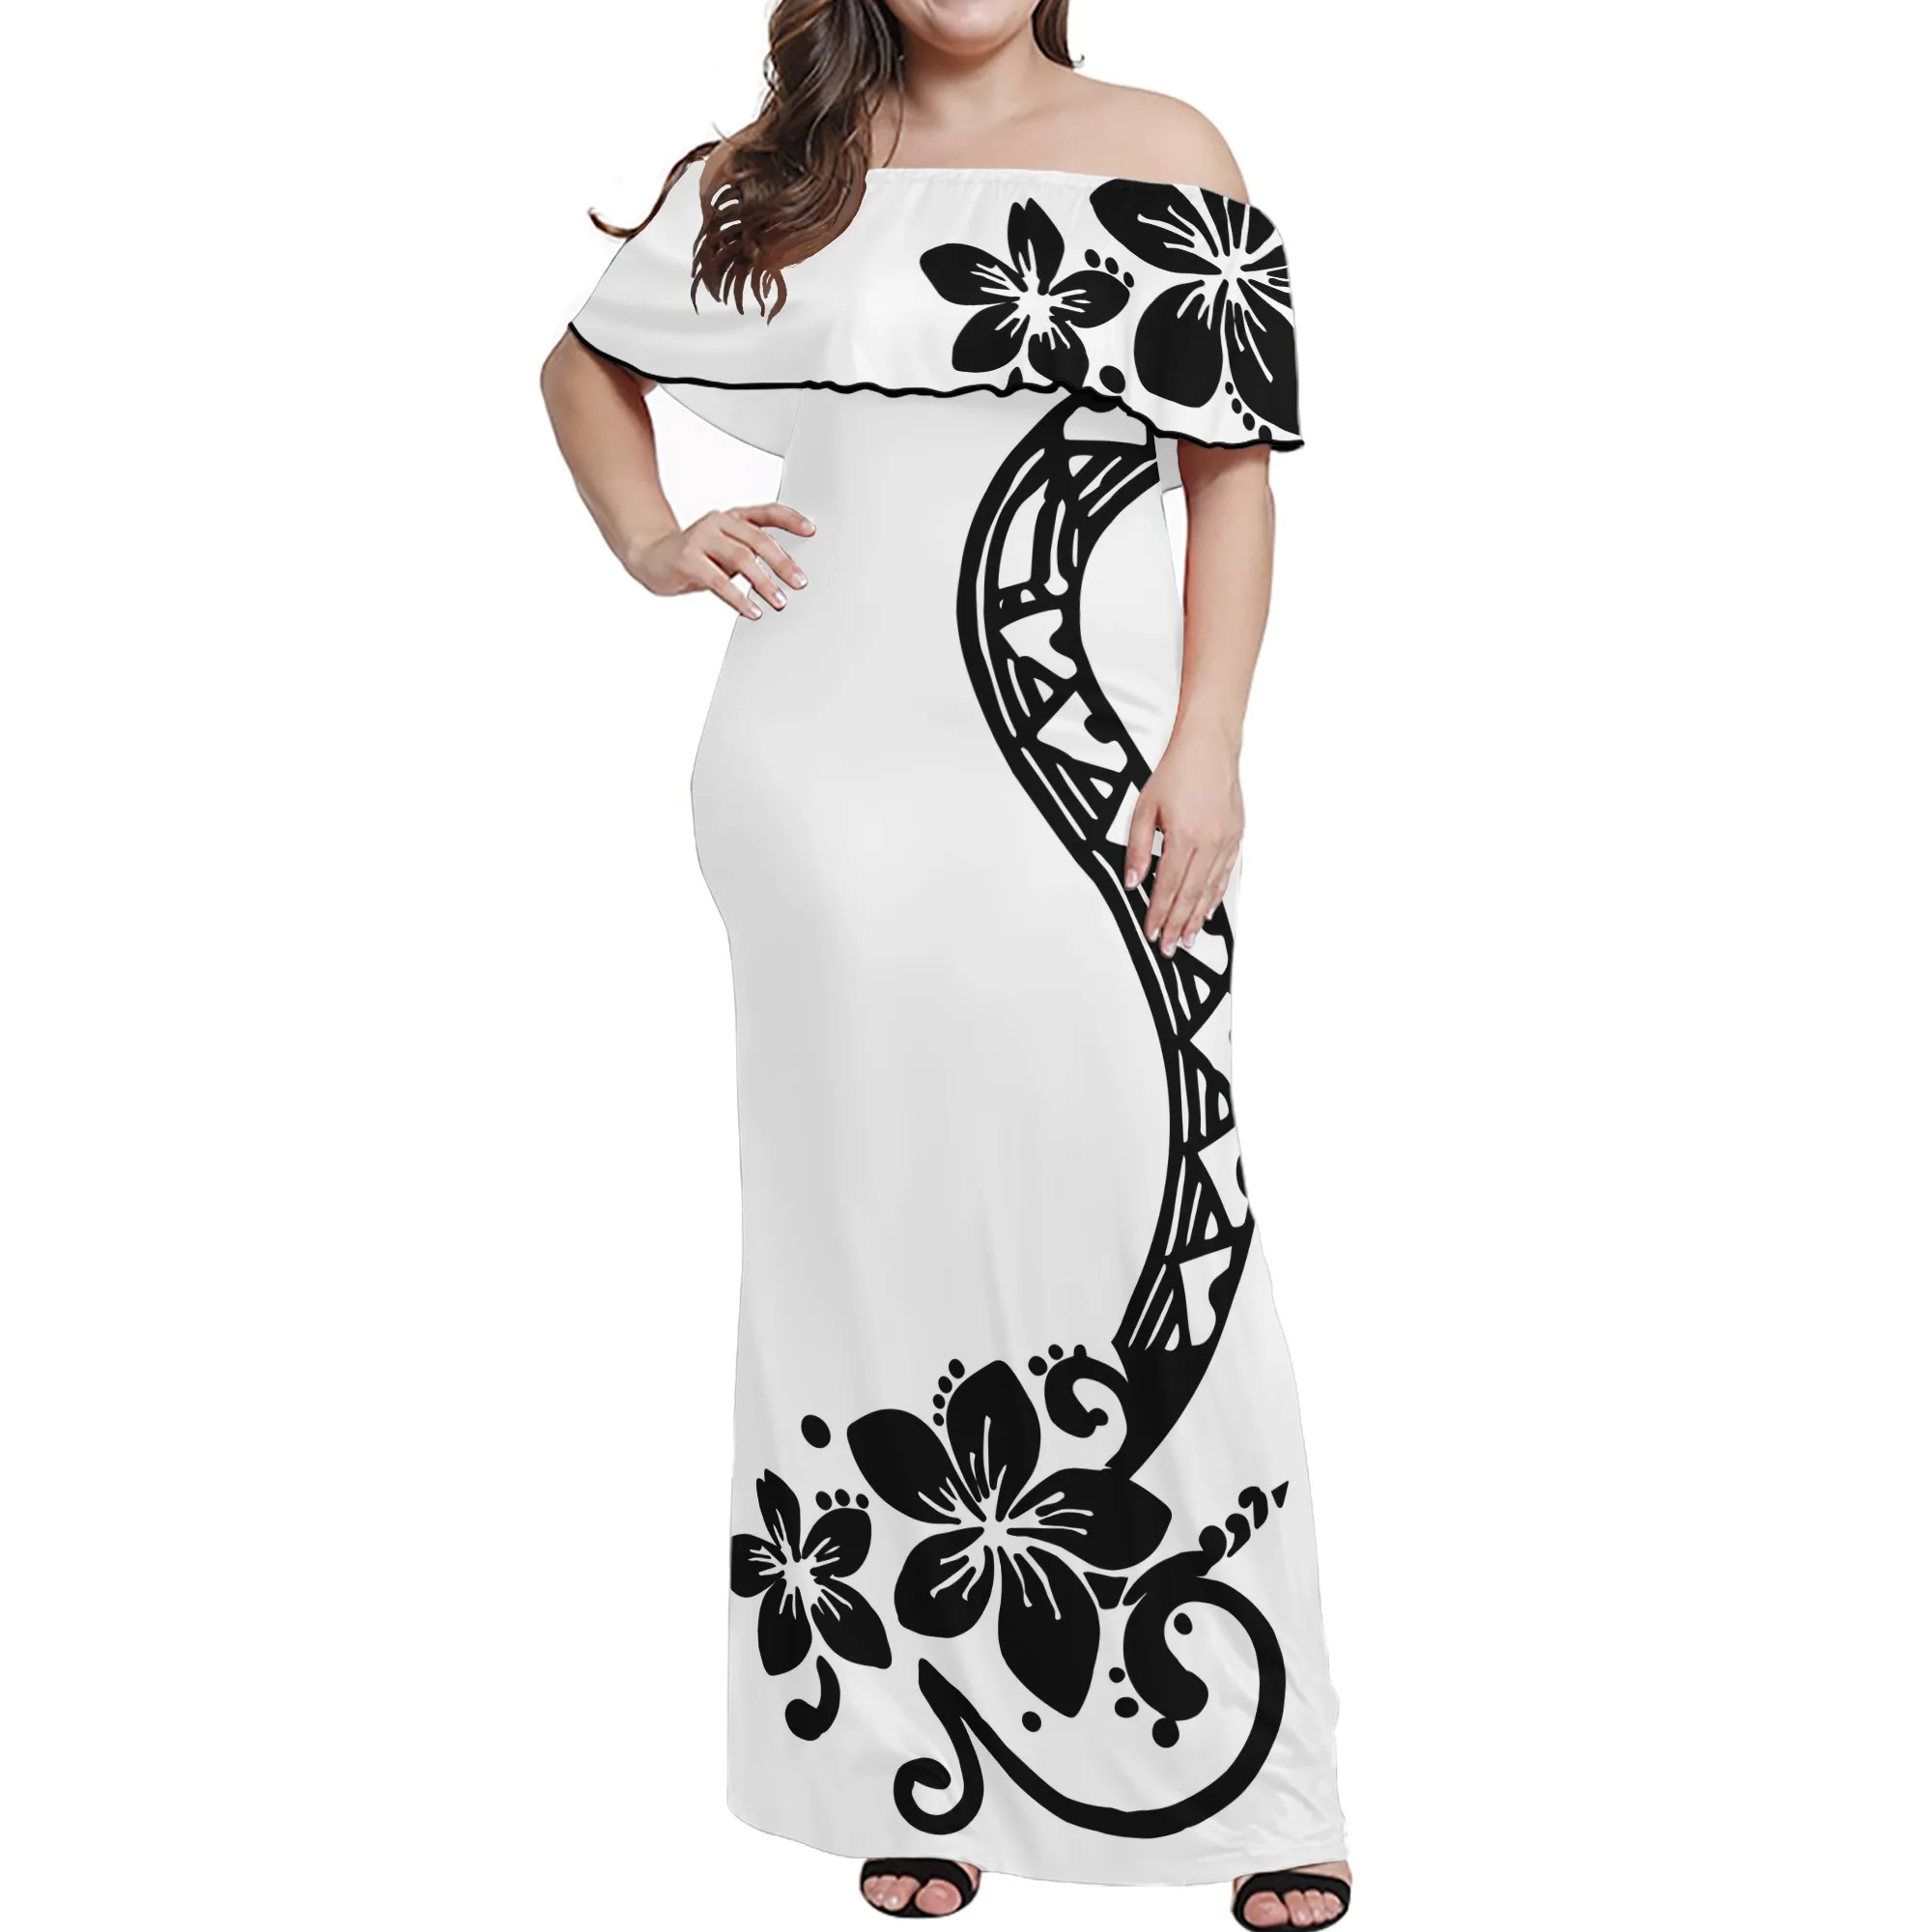 

Customized Casual Women Polynesian long Dresses white dress background with black tribal prints ruffle half shoulder maxi dress, Customized color